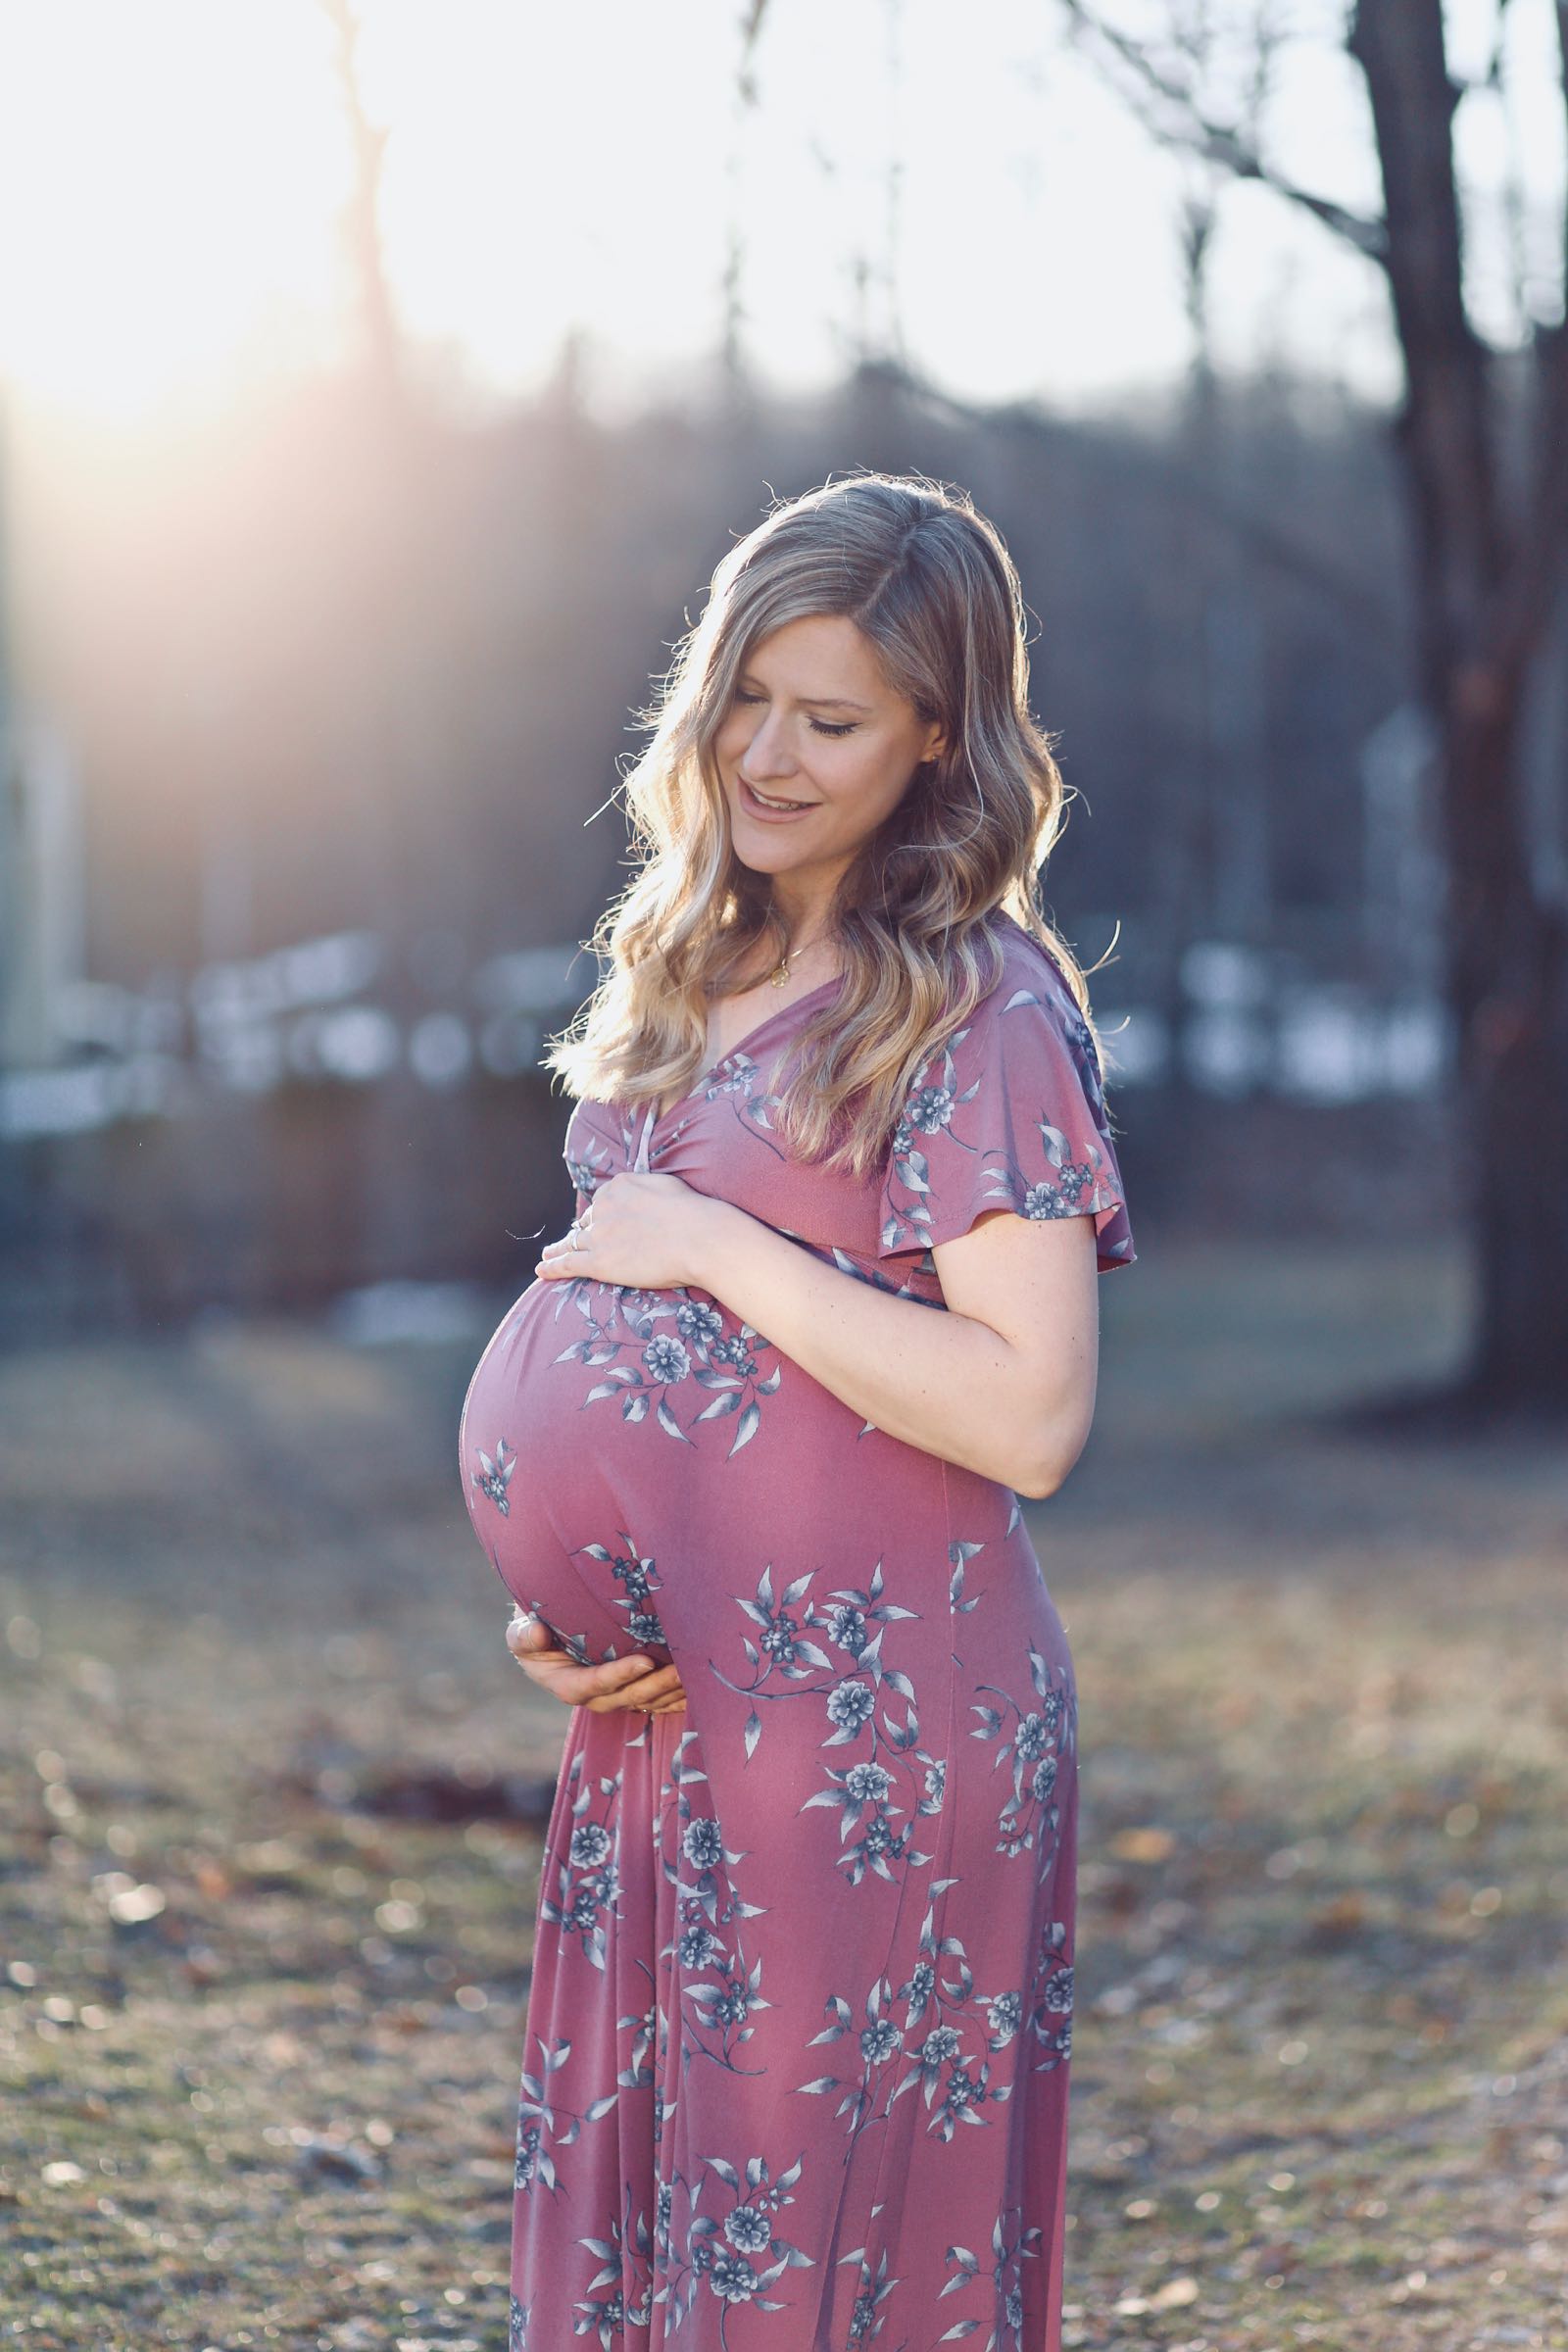 Spring Maternity Outfit Ideas: Dressy and Casual - The Budget Babe ...